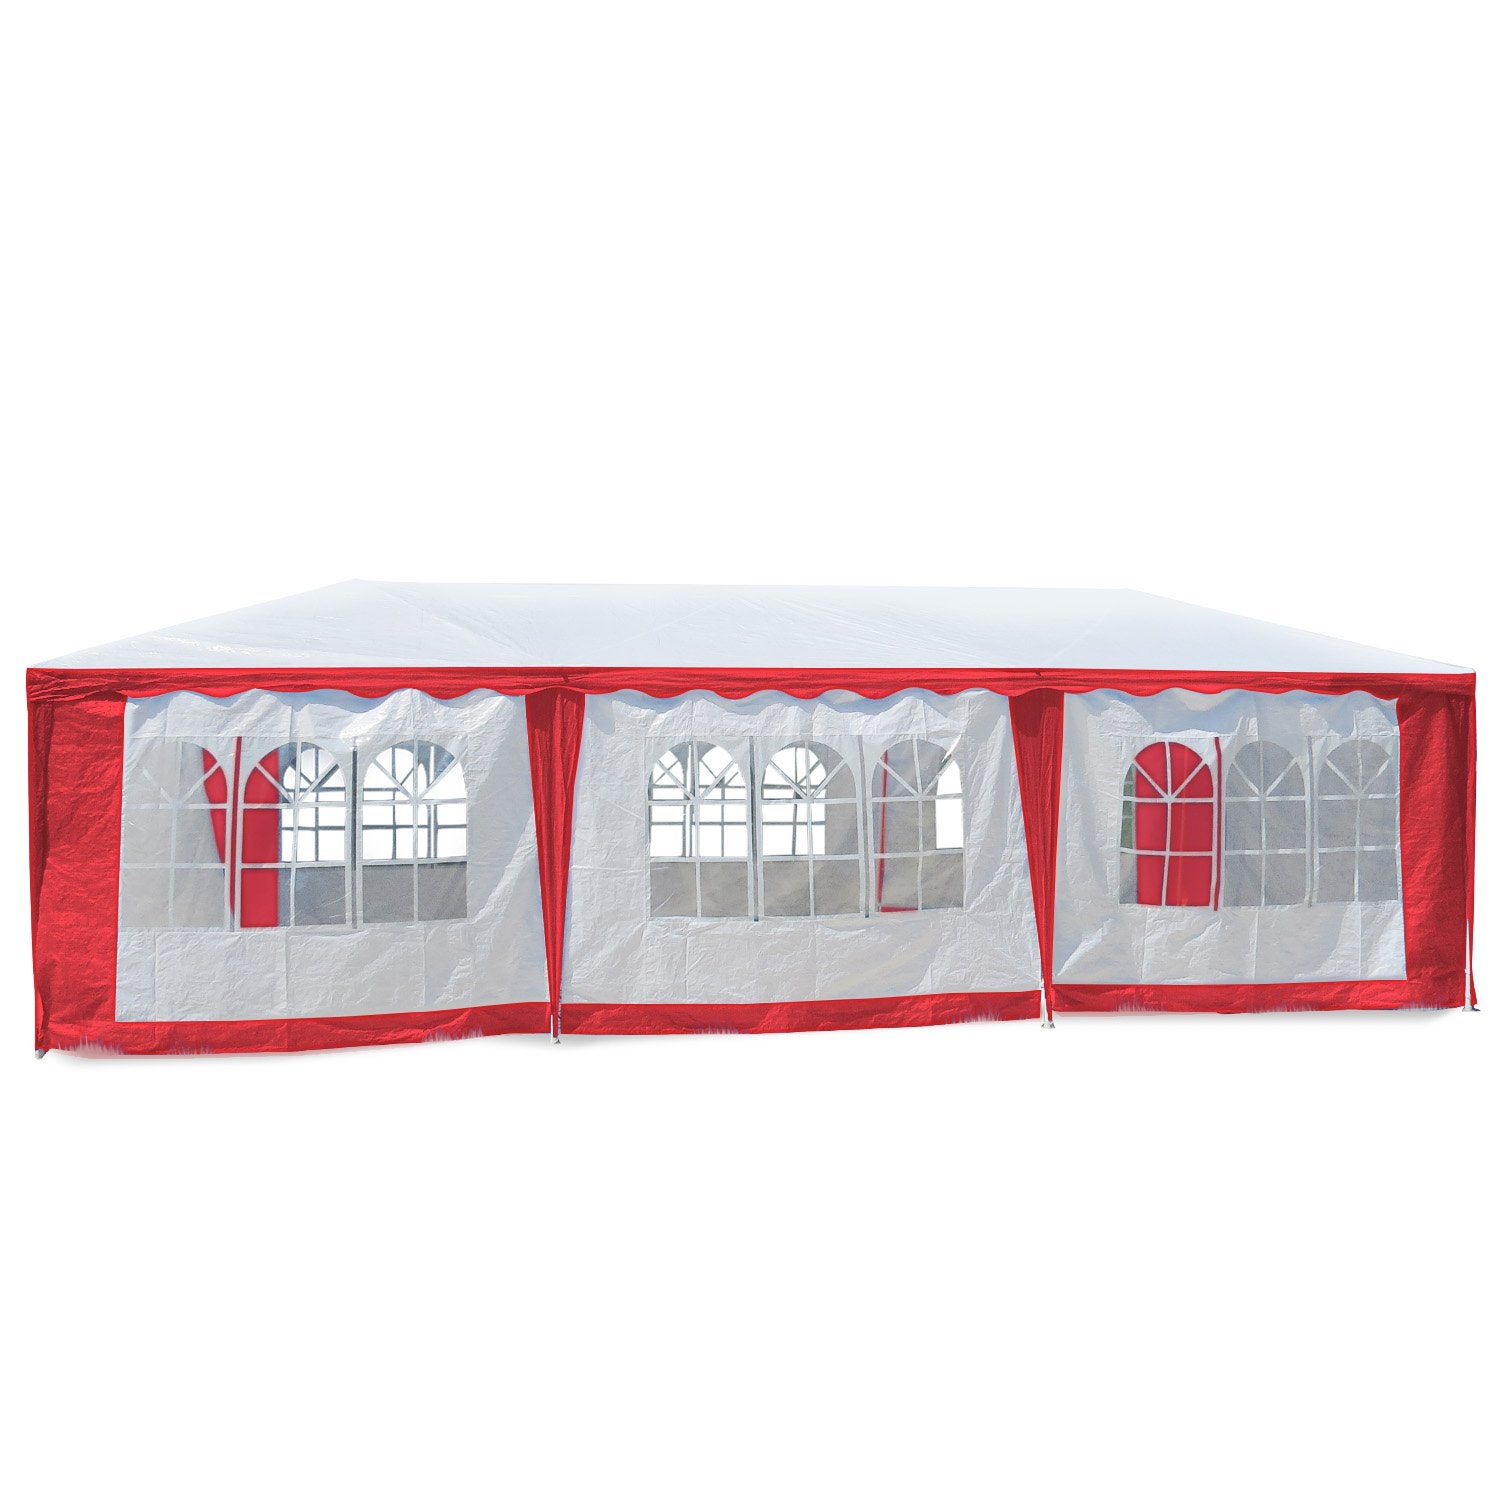 New Wallaro Large 4x8 Gazebo Party Wedding Tent Outdoor Event Marquee Red